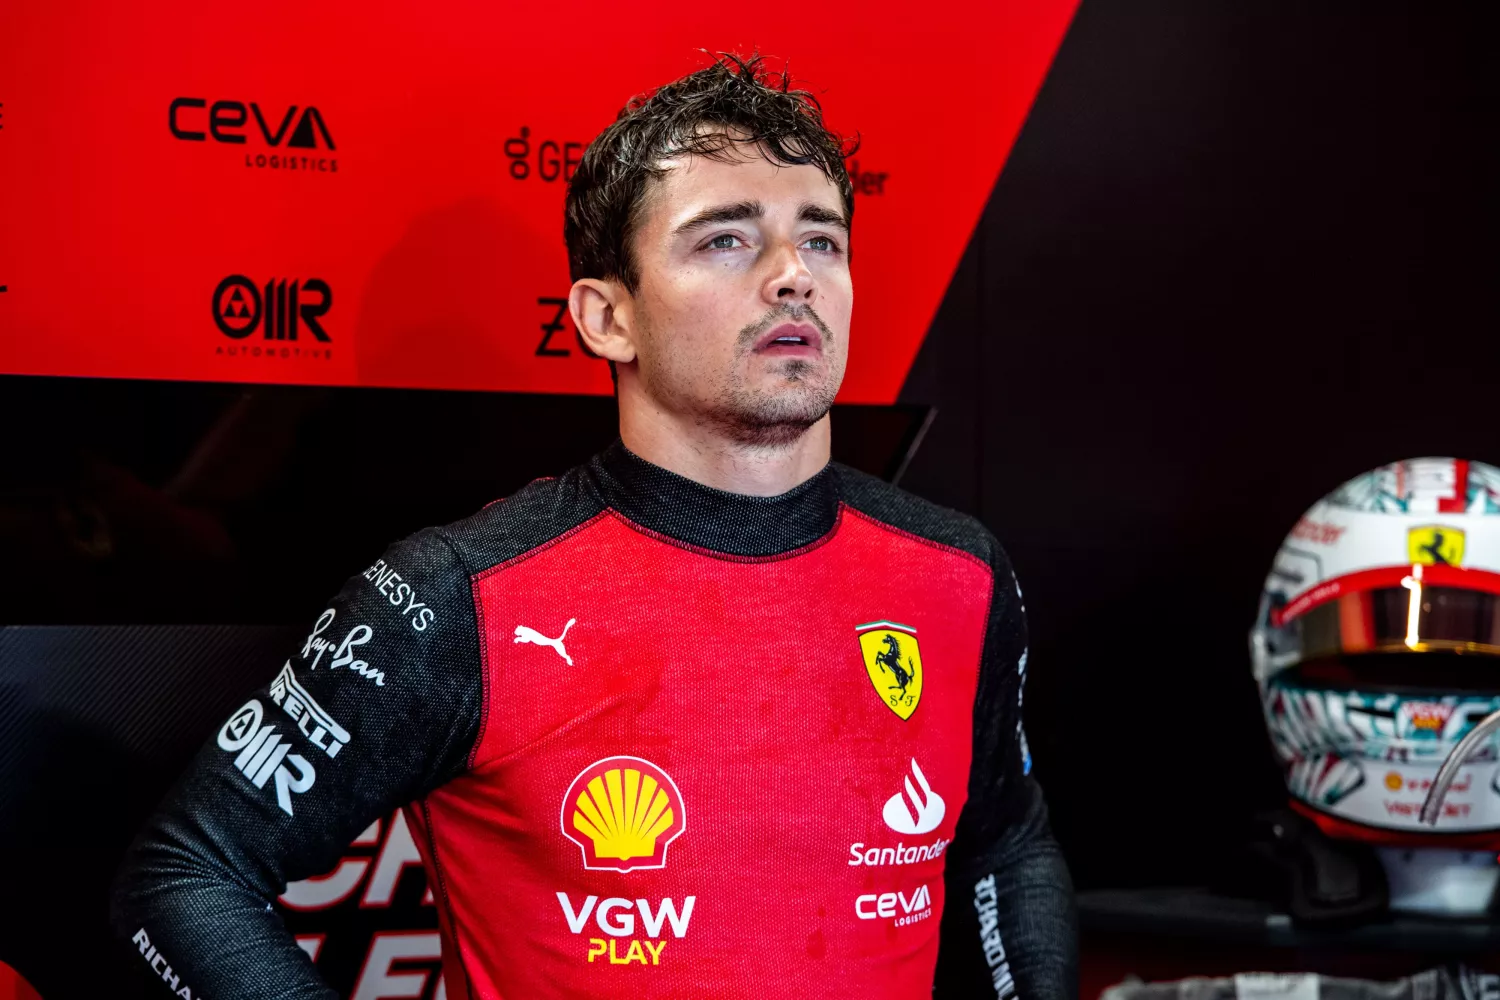 Leclerc claims fastest time in FP3 at Australian GP, surpassing Verstappen and Sainz